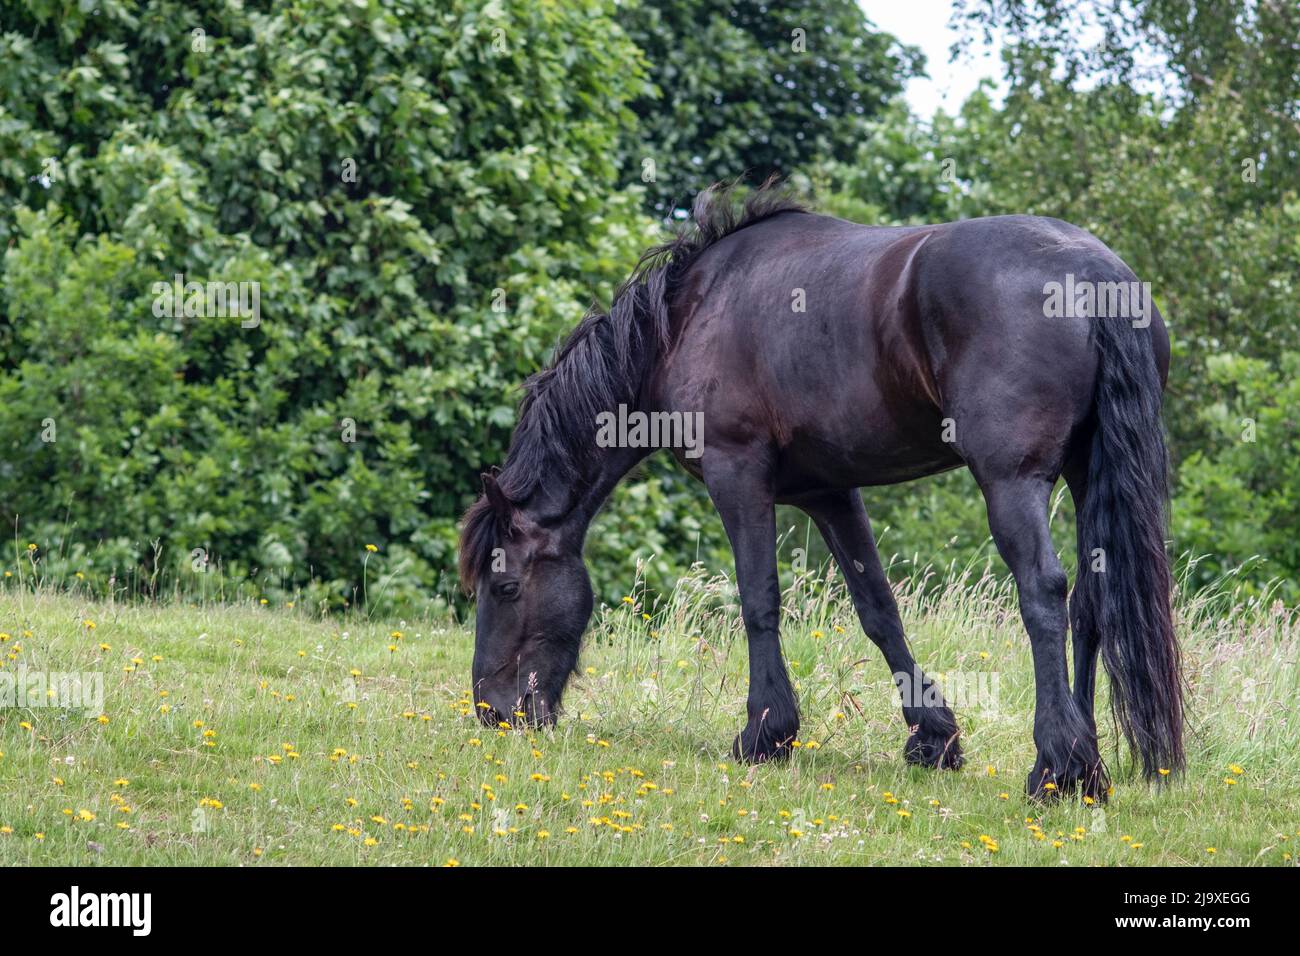 Black horse/pony grazing in a field with trees behind Stock Photo